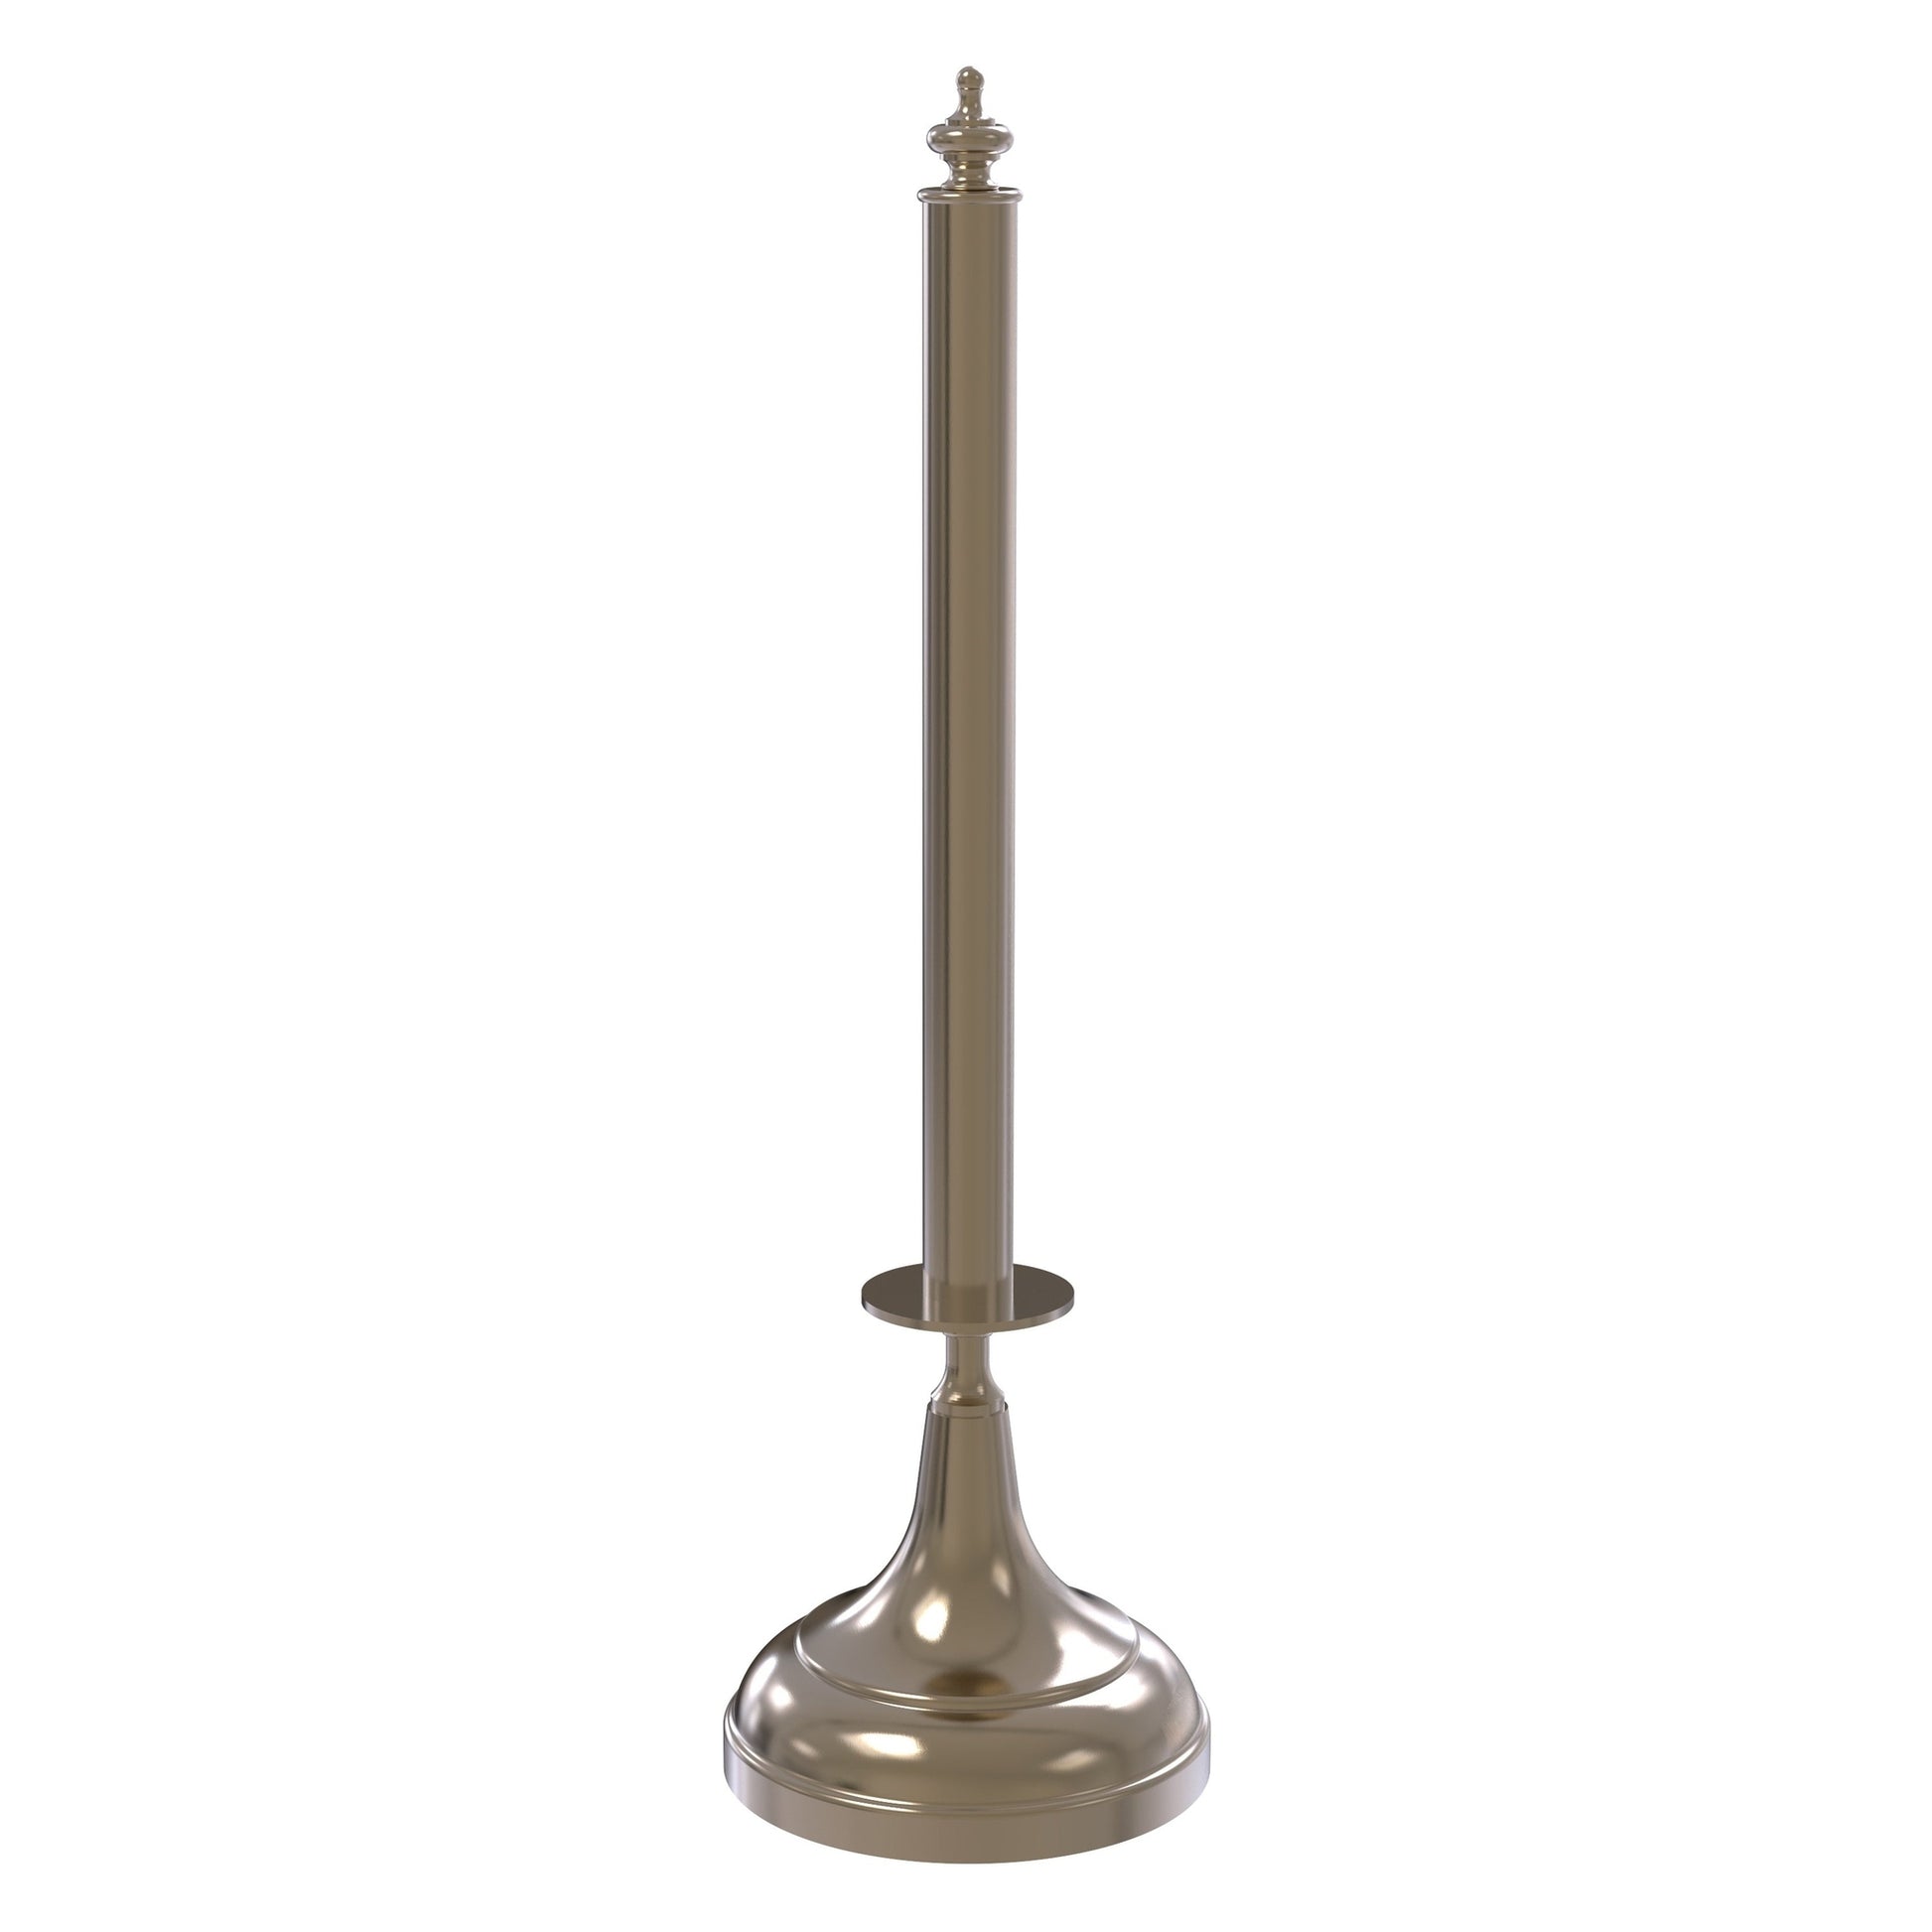 Allied Brass 1052 5.5" Antique Pewter Solid Brass Paper Towel Holder